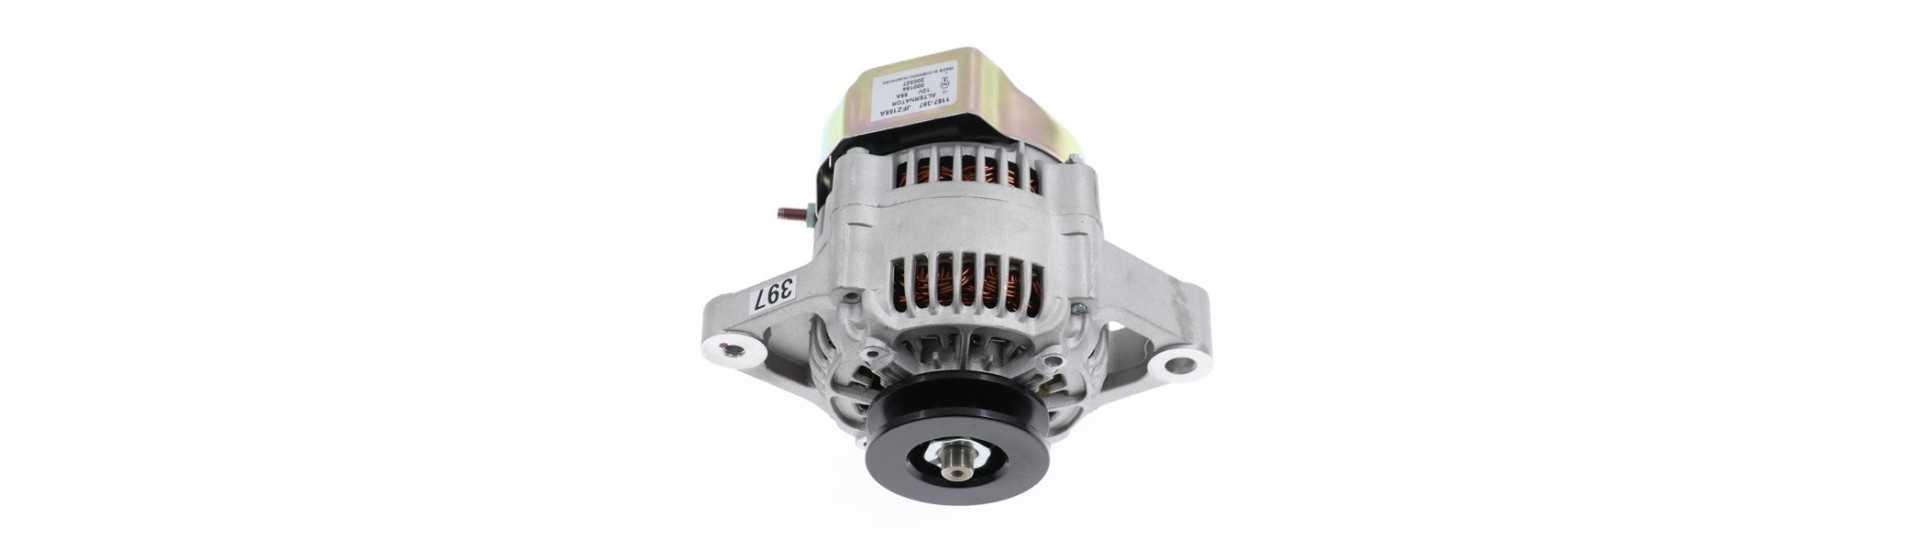 Alternator at best price for car without a permit